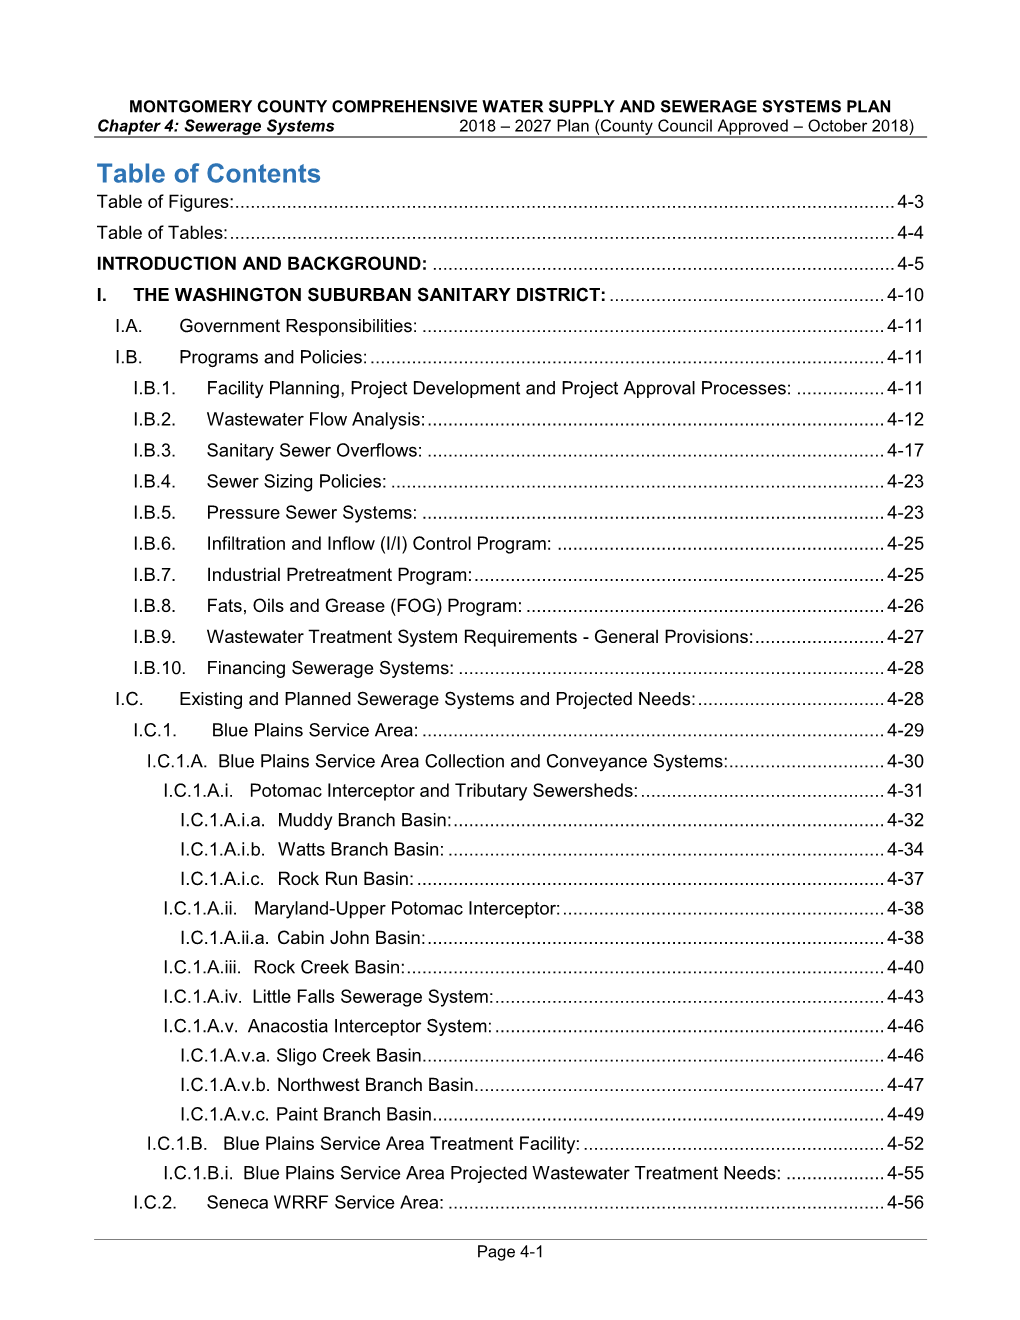 SEWERAGE SYSTEMS PLAN Chapter 4: Sewerage Systems 2018 – 2027 Plan (County Council Approved – October 2018) Table of Contents Table of Figures: